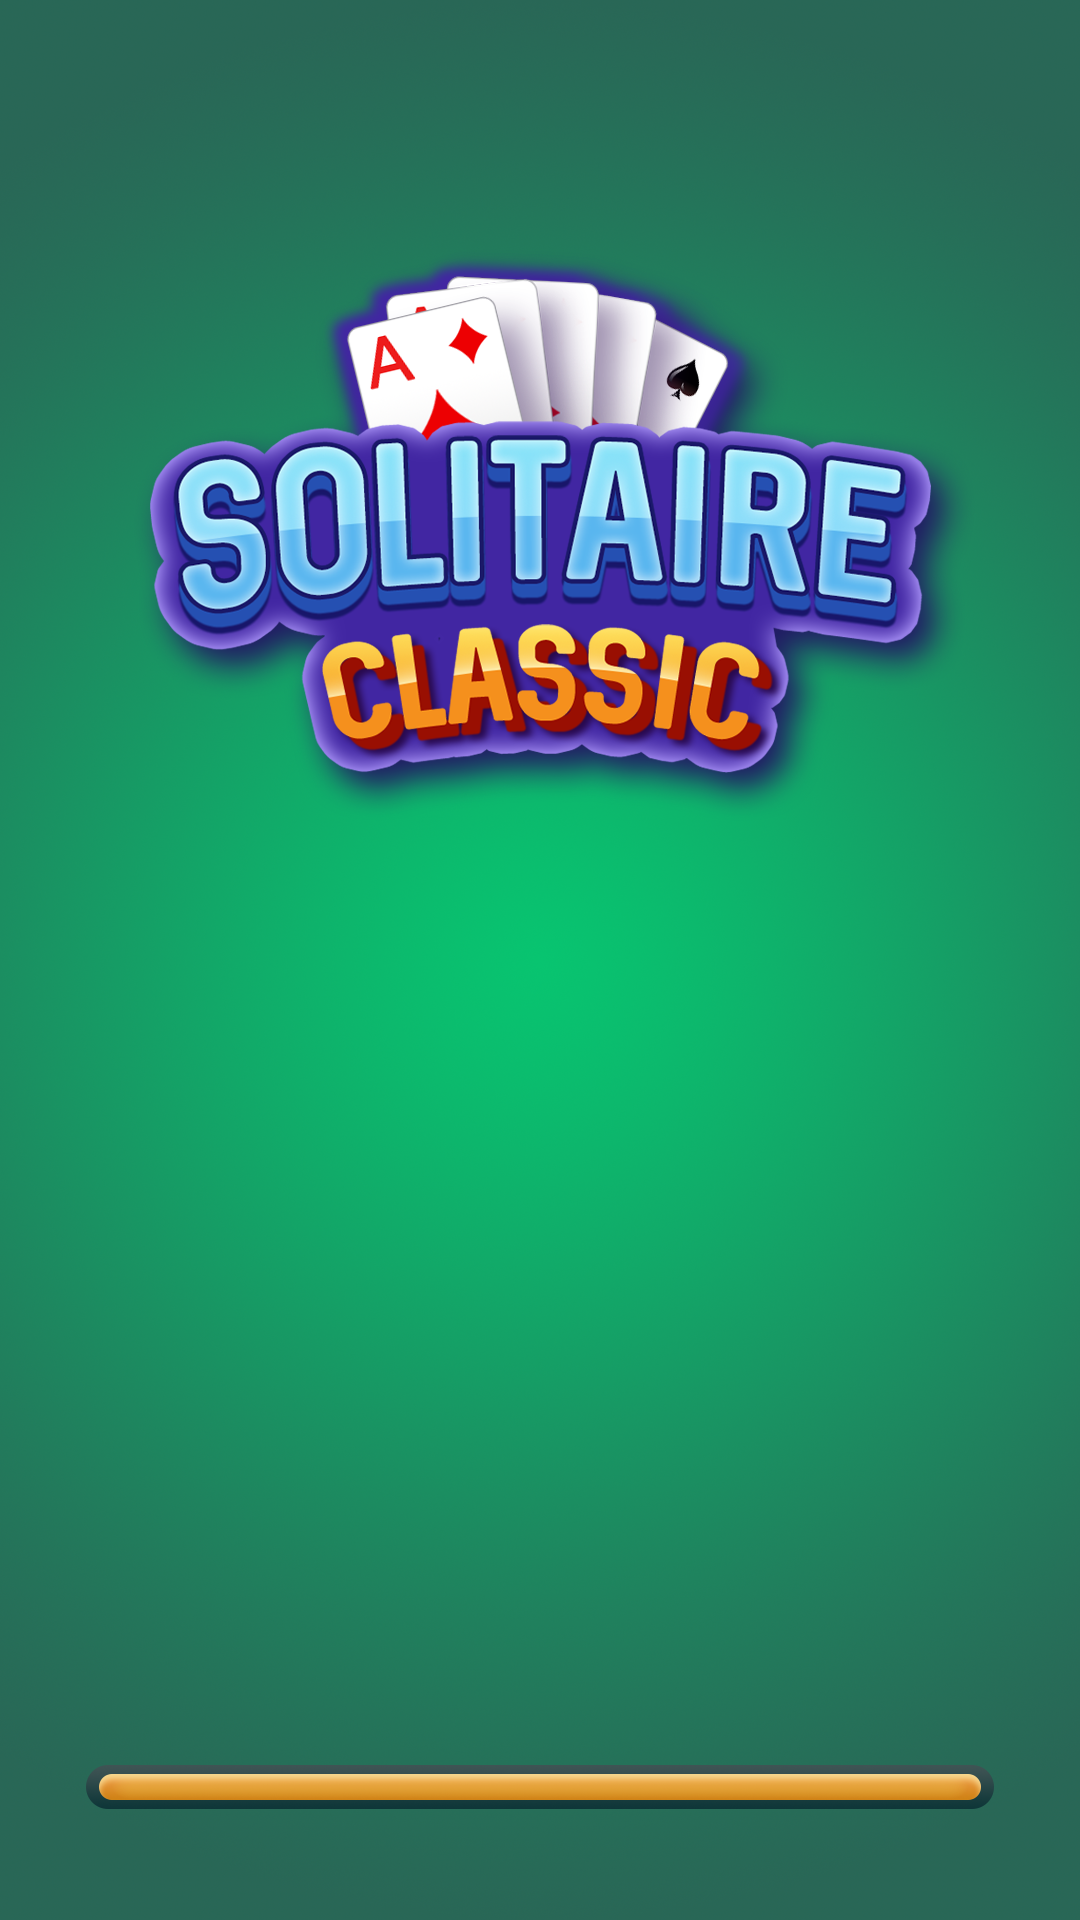 🕹️ Play Daily Freecell Solitaire Card Video Game Online for Free